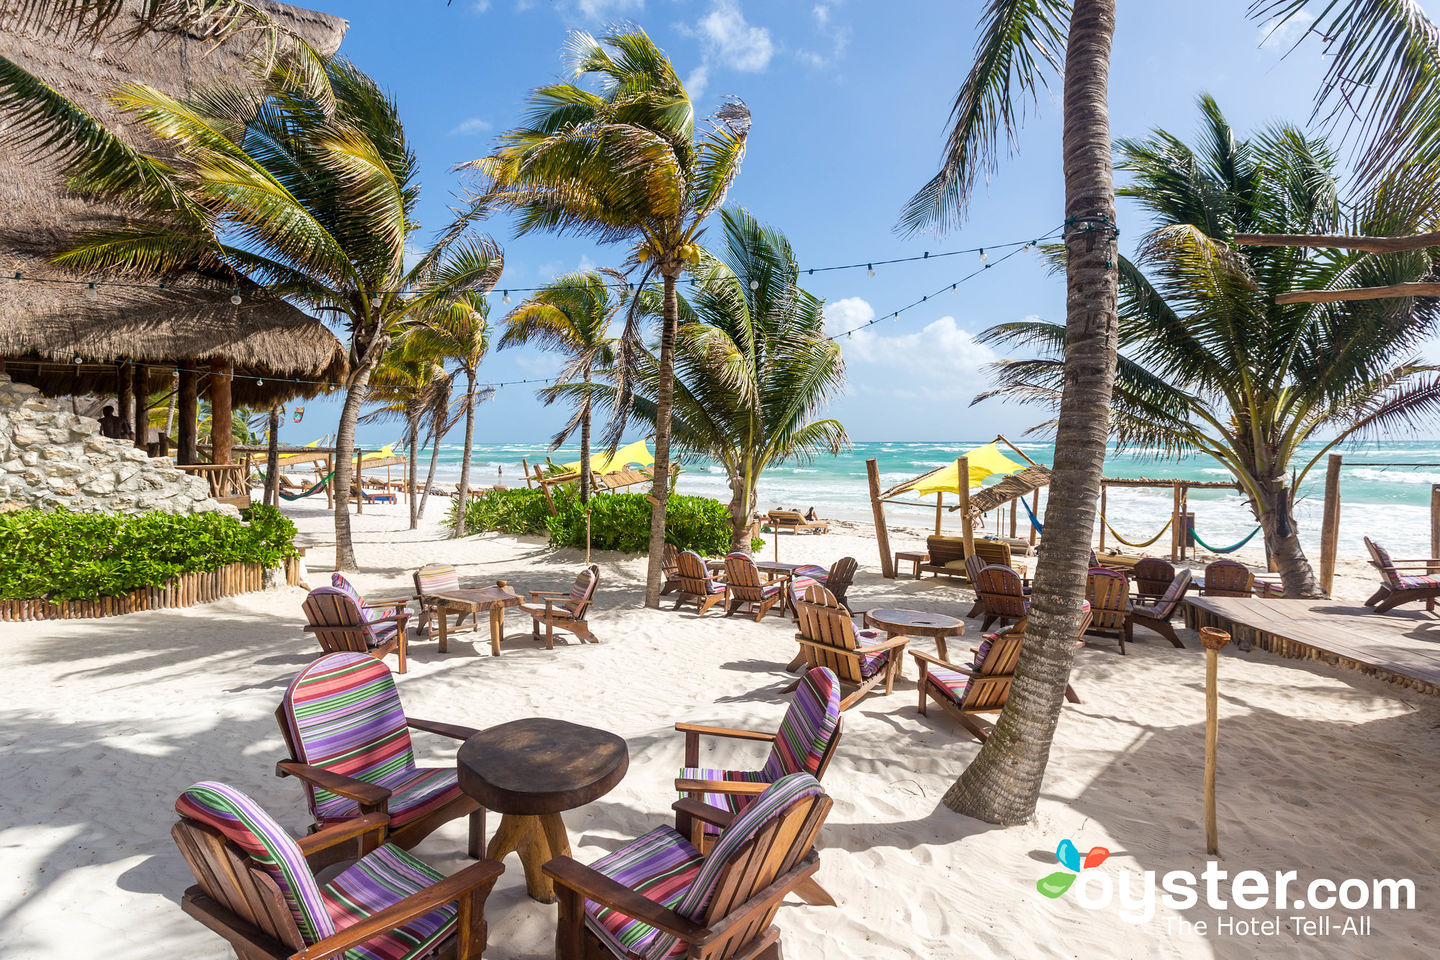 Ahau Tulum Review: What To REALLY Expect If You Stay